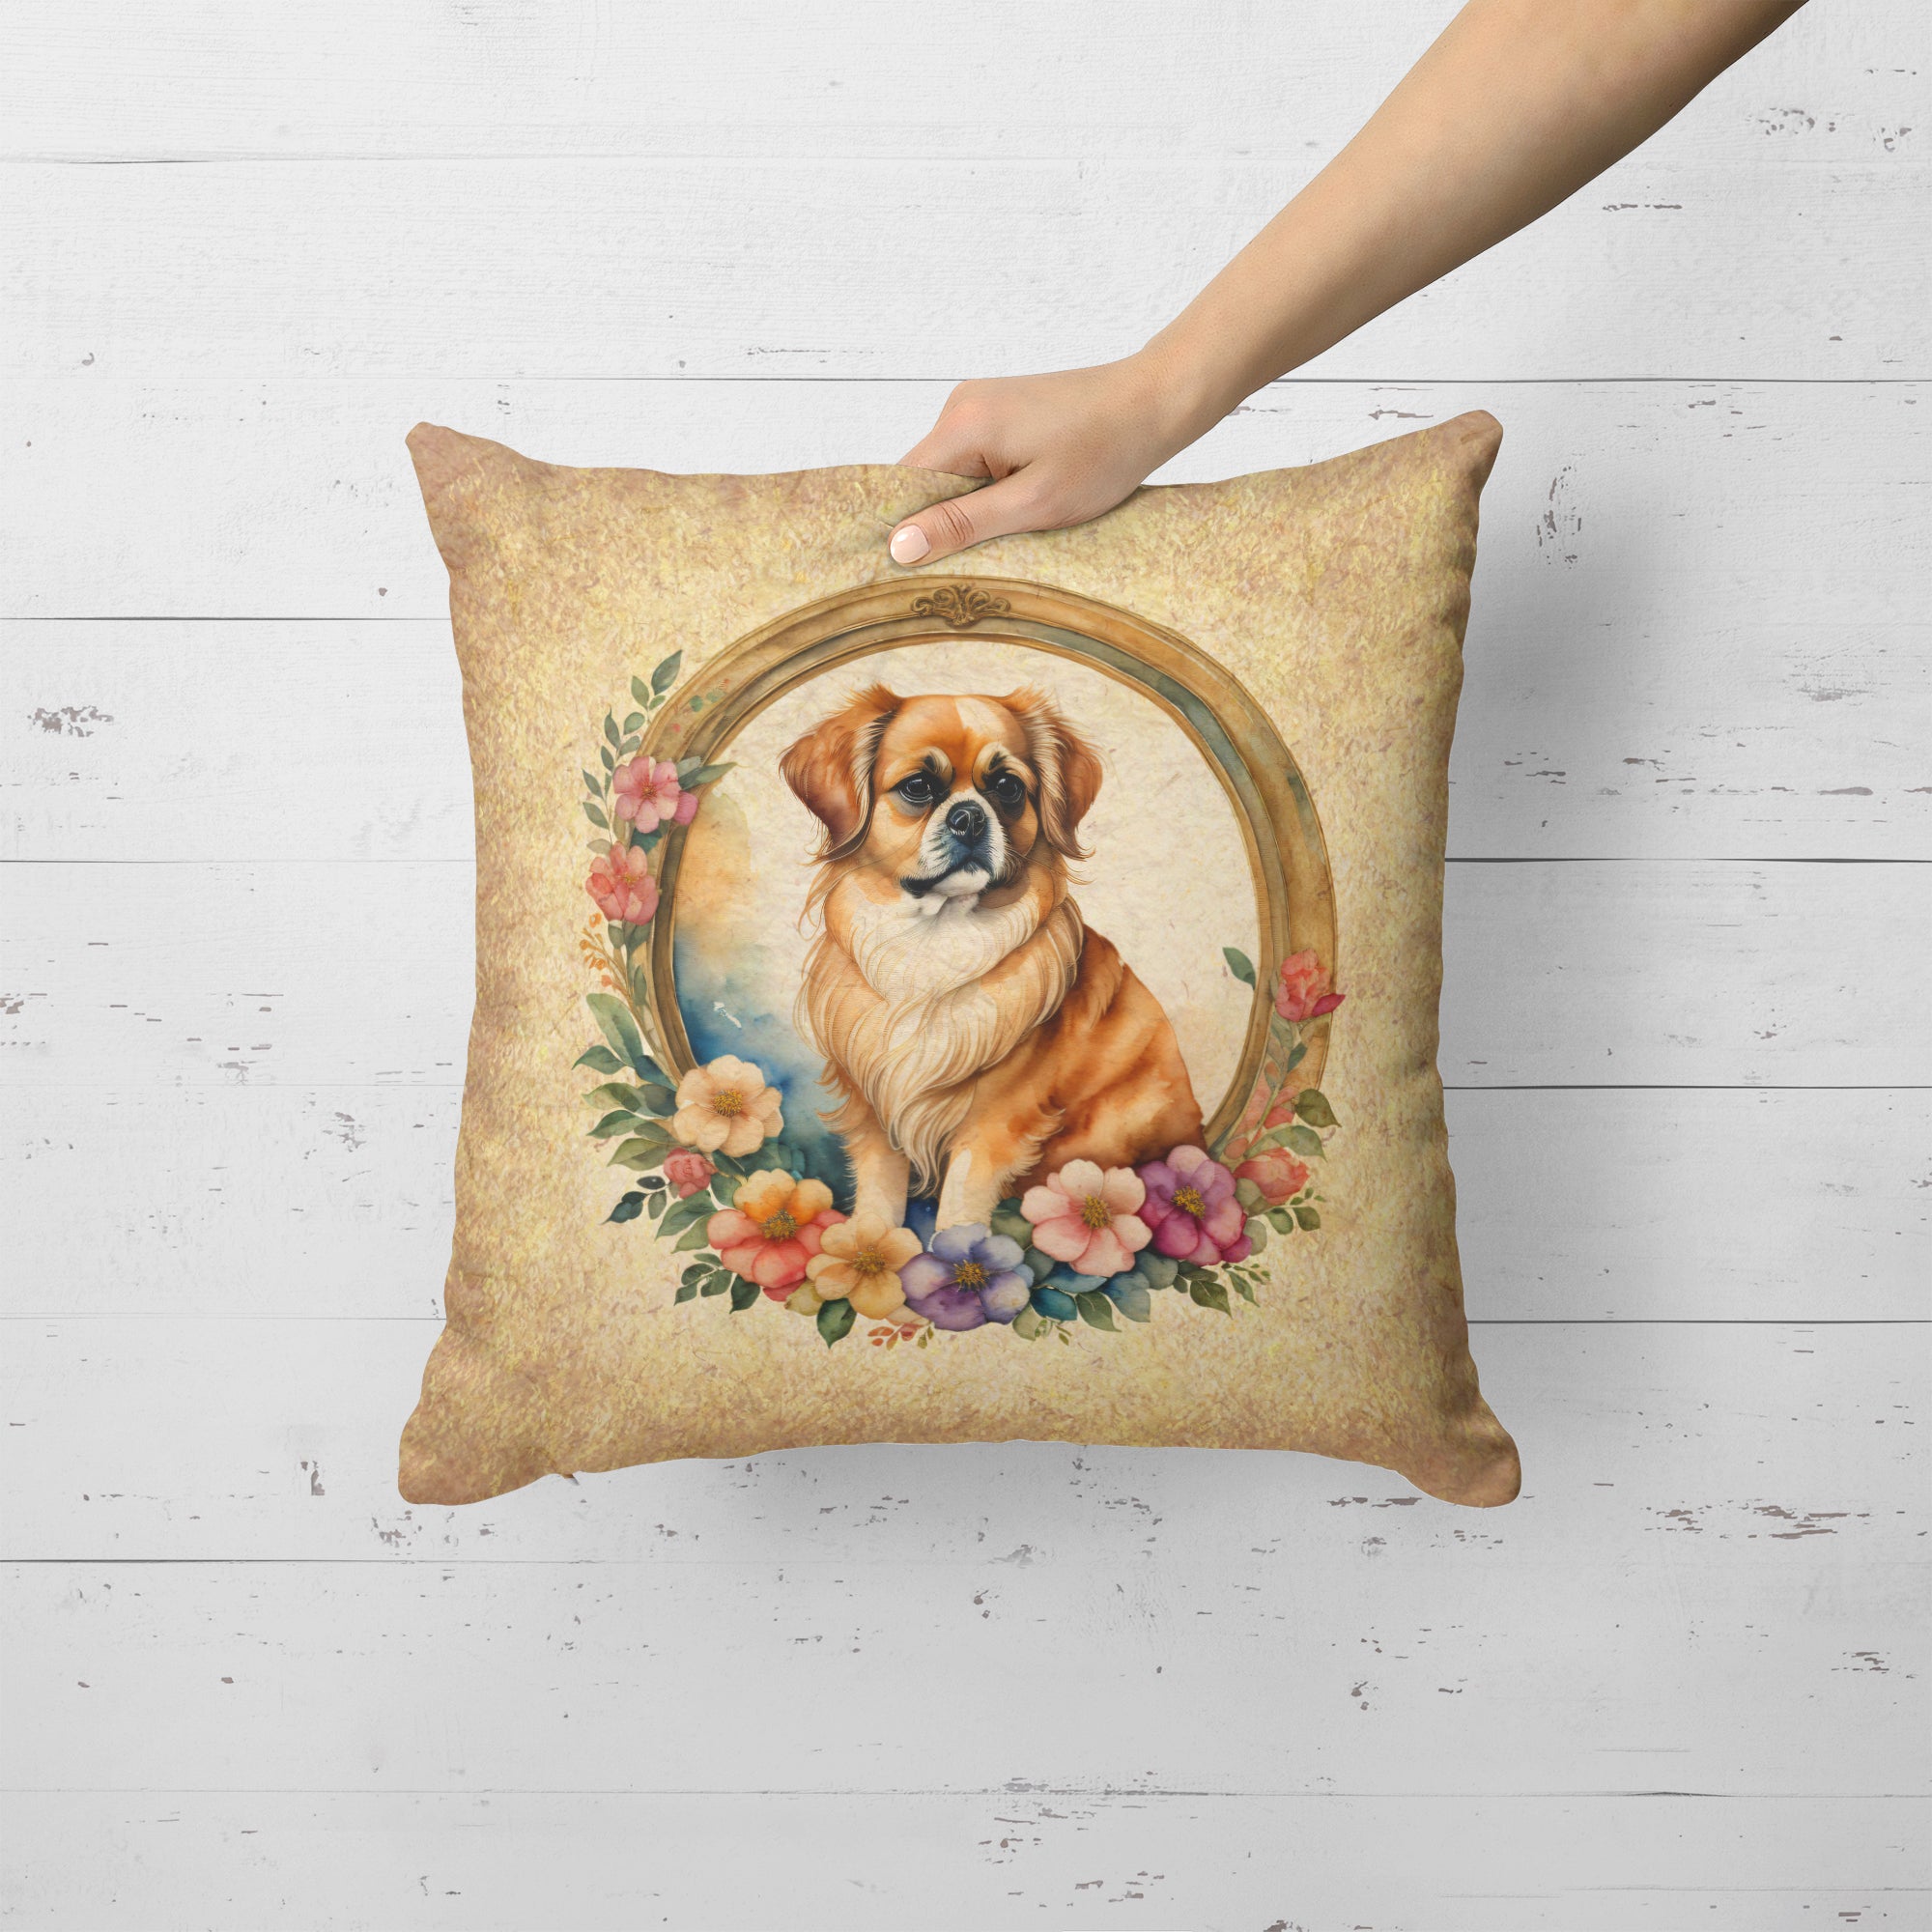 Buy this Tibetan Spaniel and Flowers Fabric Decorative Pillow